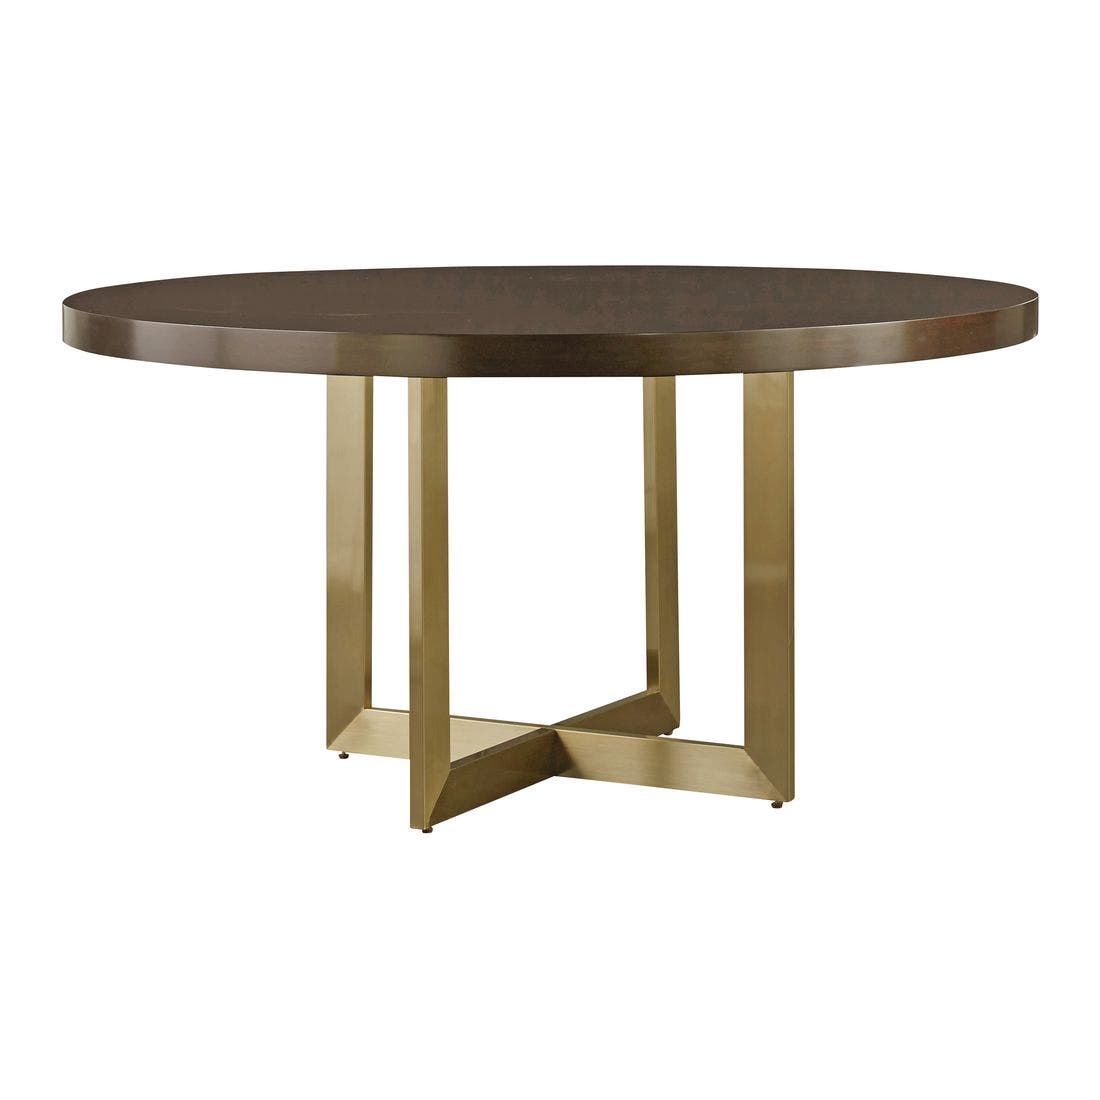 19134680-644757-furniture-dining-room-dining-tables-45